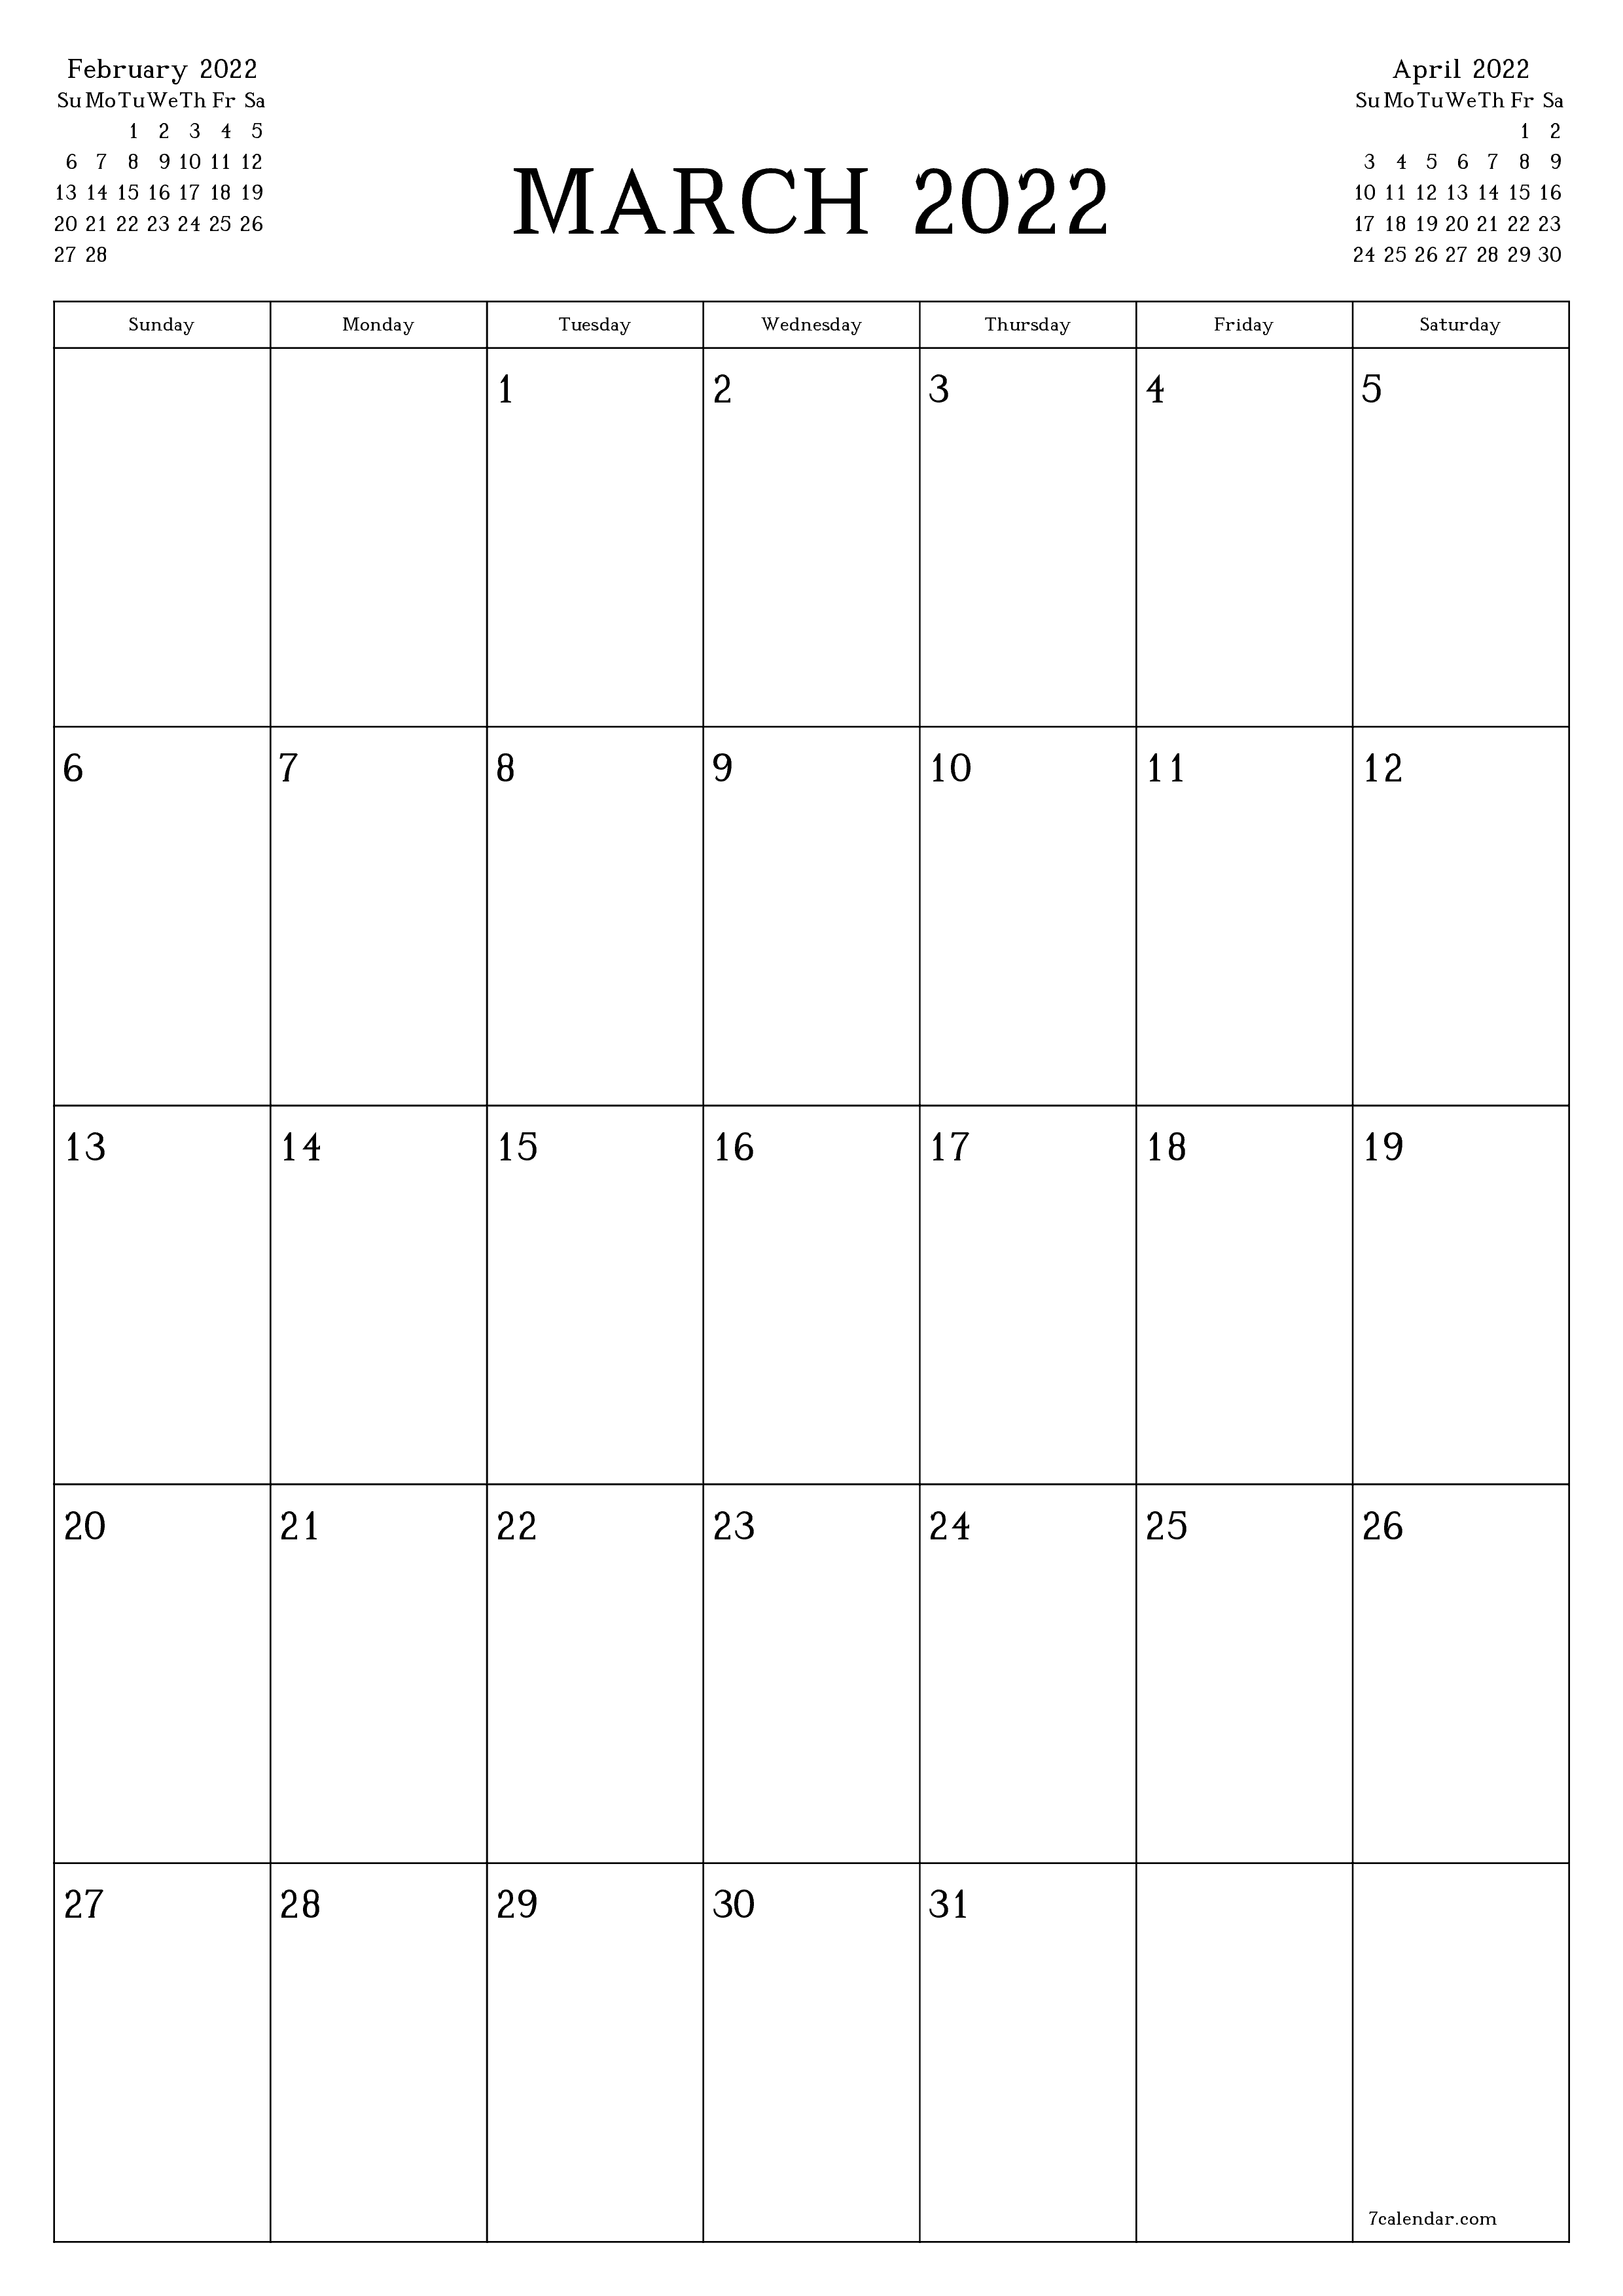 Blank monthly printable calendar and planner for month March 2022 with notes save and print to PDF PNG English - 7calendar.com